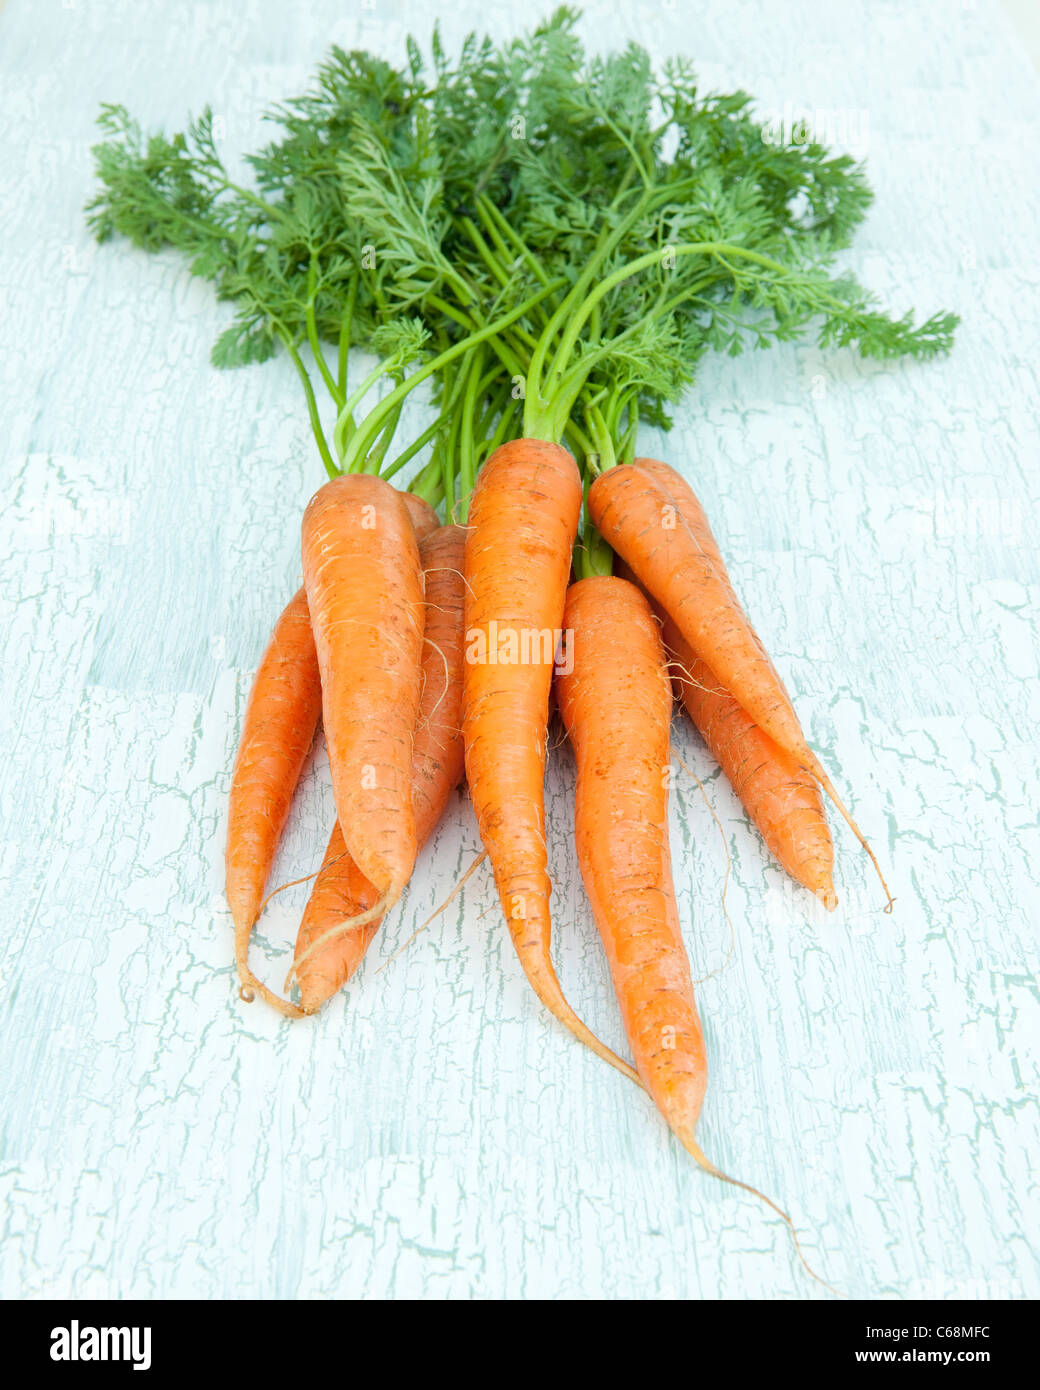 A bunch of carrots Stock Photo